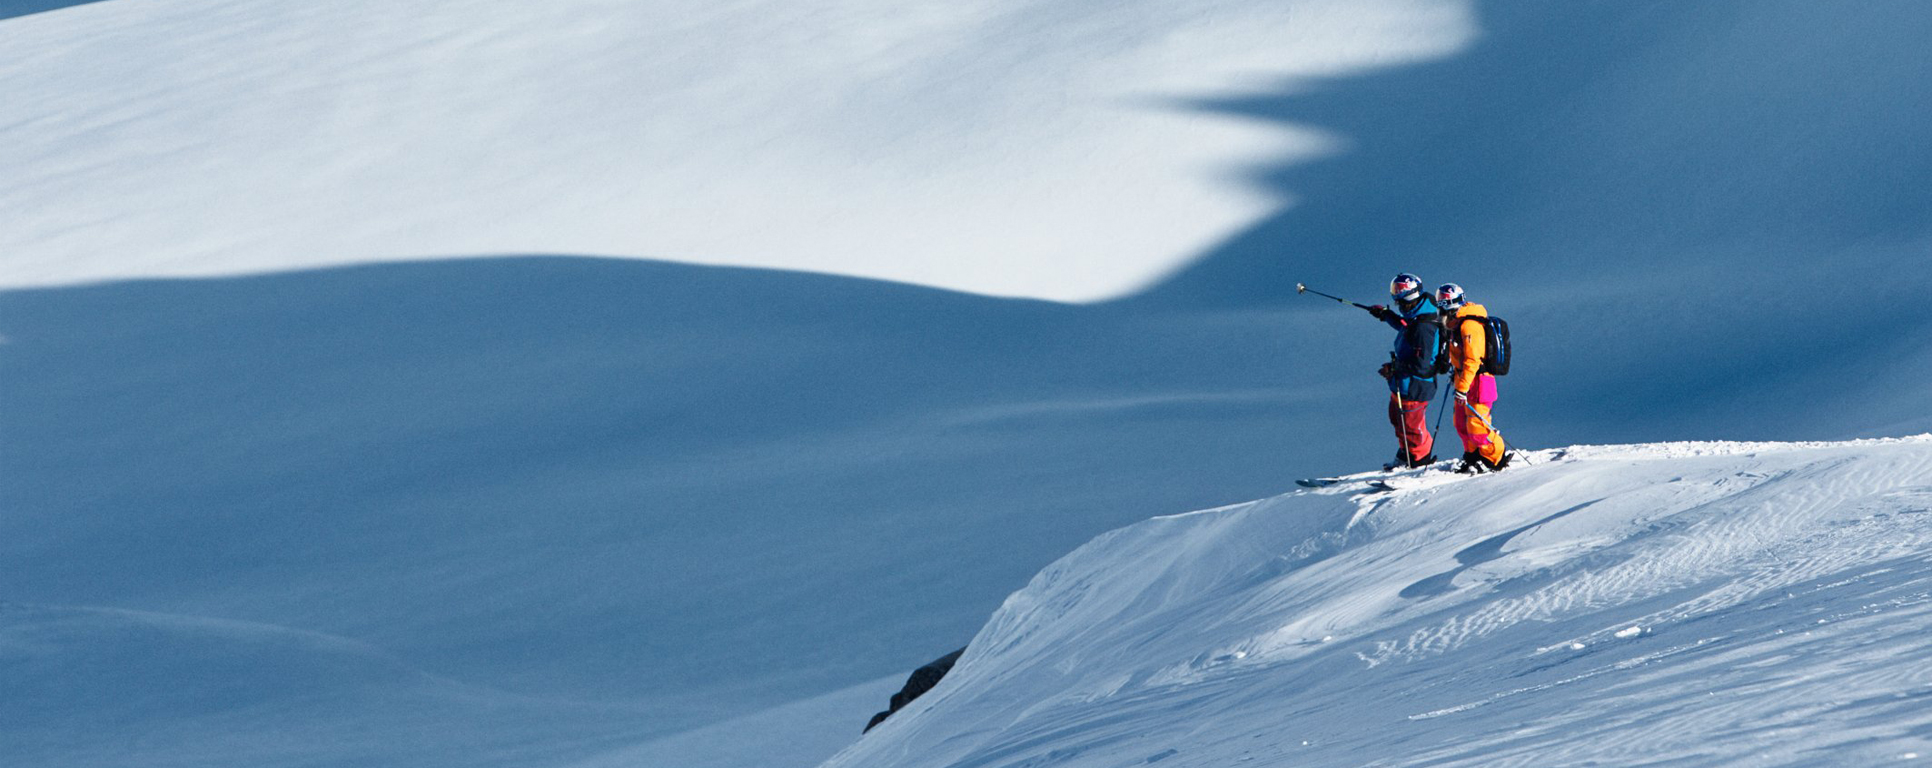 A skier knows – Perspective from the wilderness